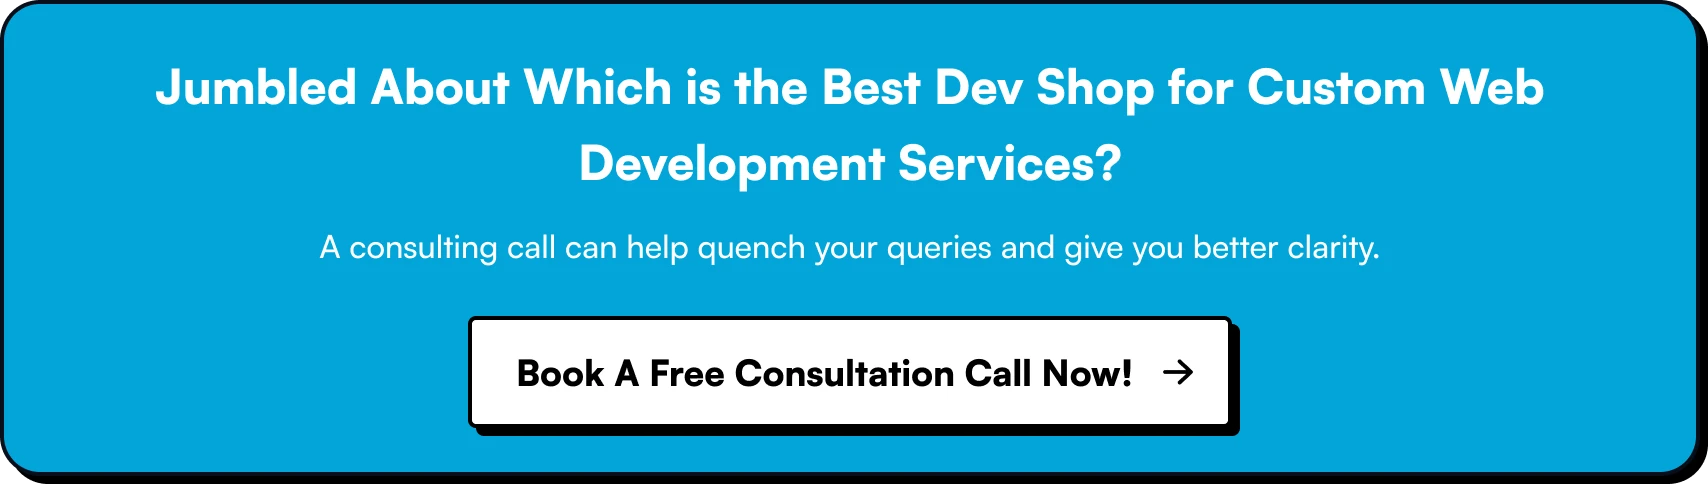 Jumbled About Which is the Best Dev Shop for Custom Web Development Services